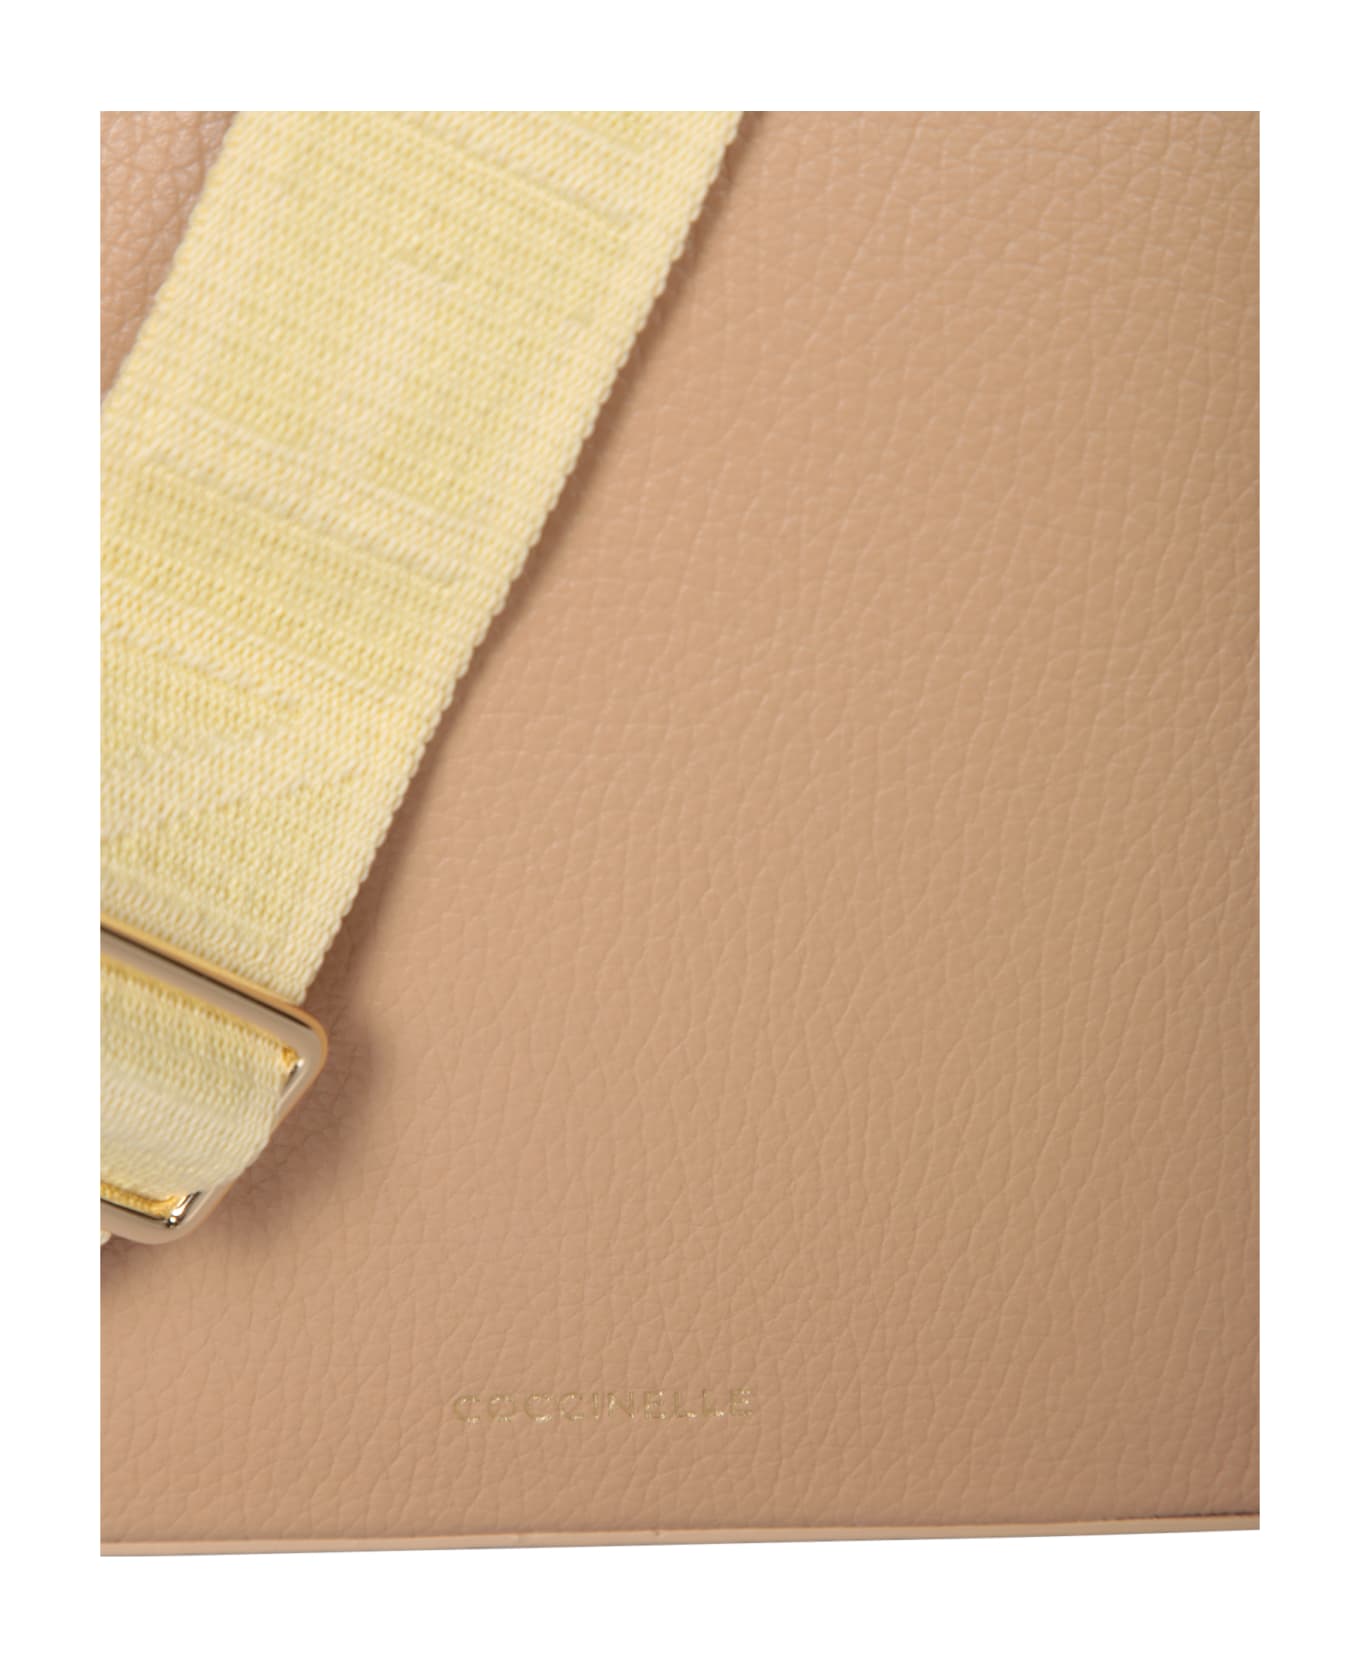 Coccinelle Tebe Small Beige Bag - Beige